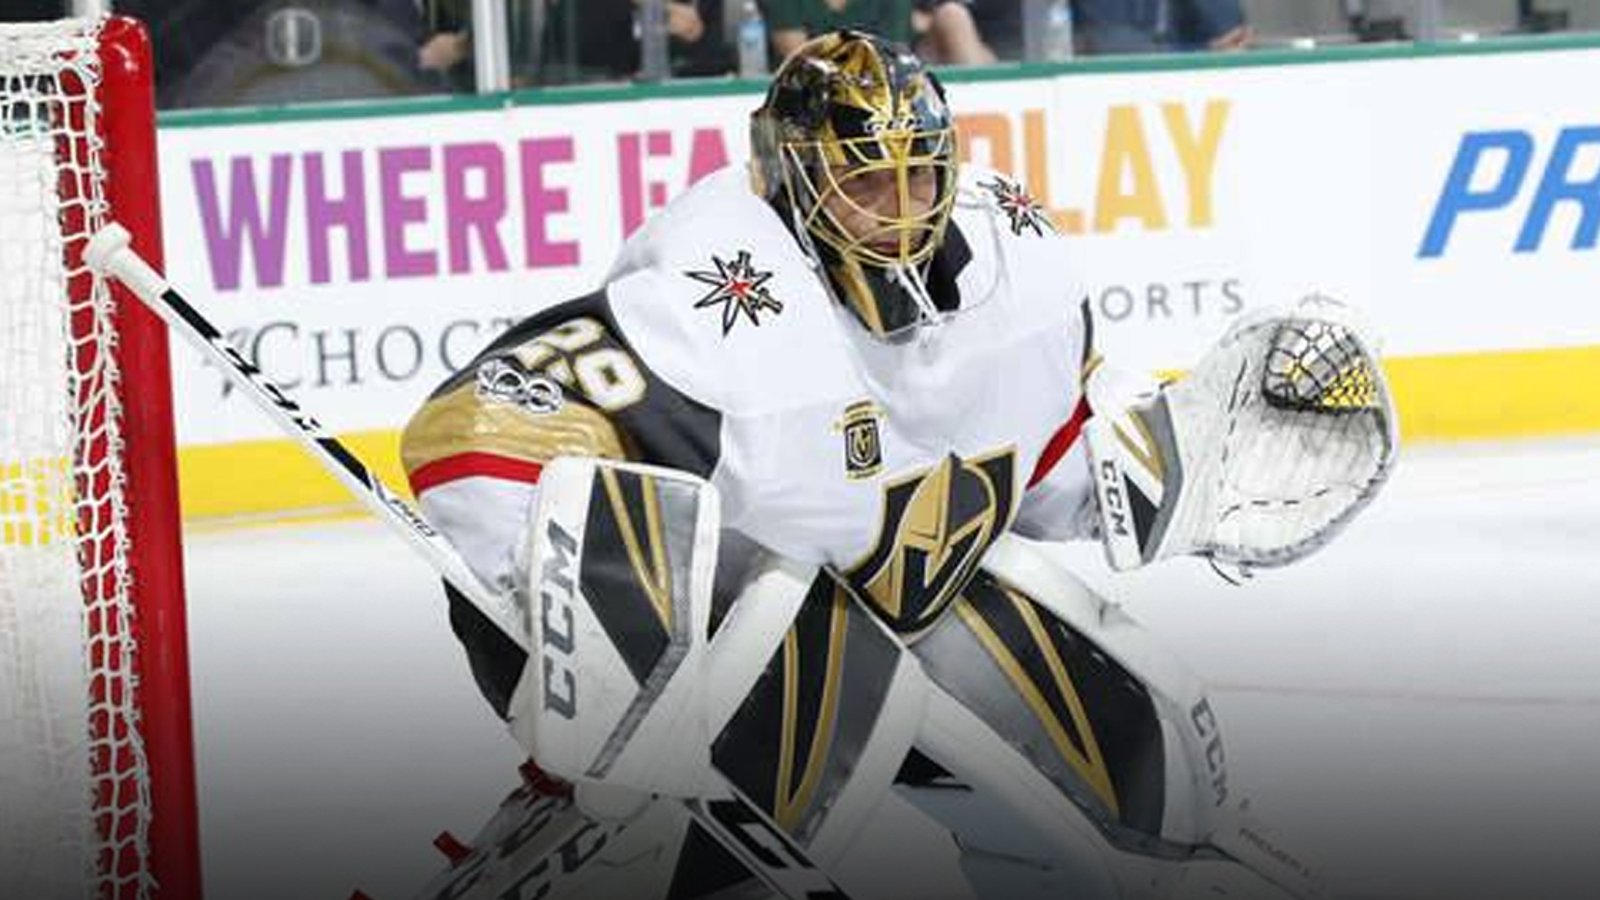 Breaking: The worst has been confirmed for Marc-Andre Fleury